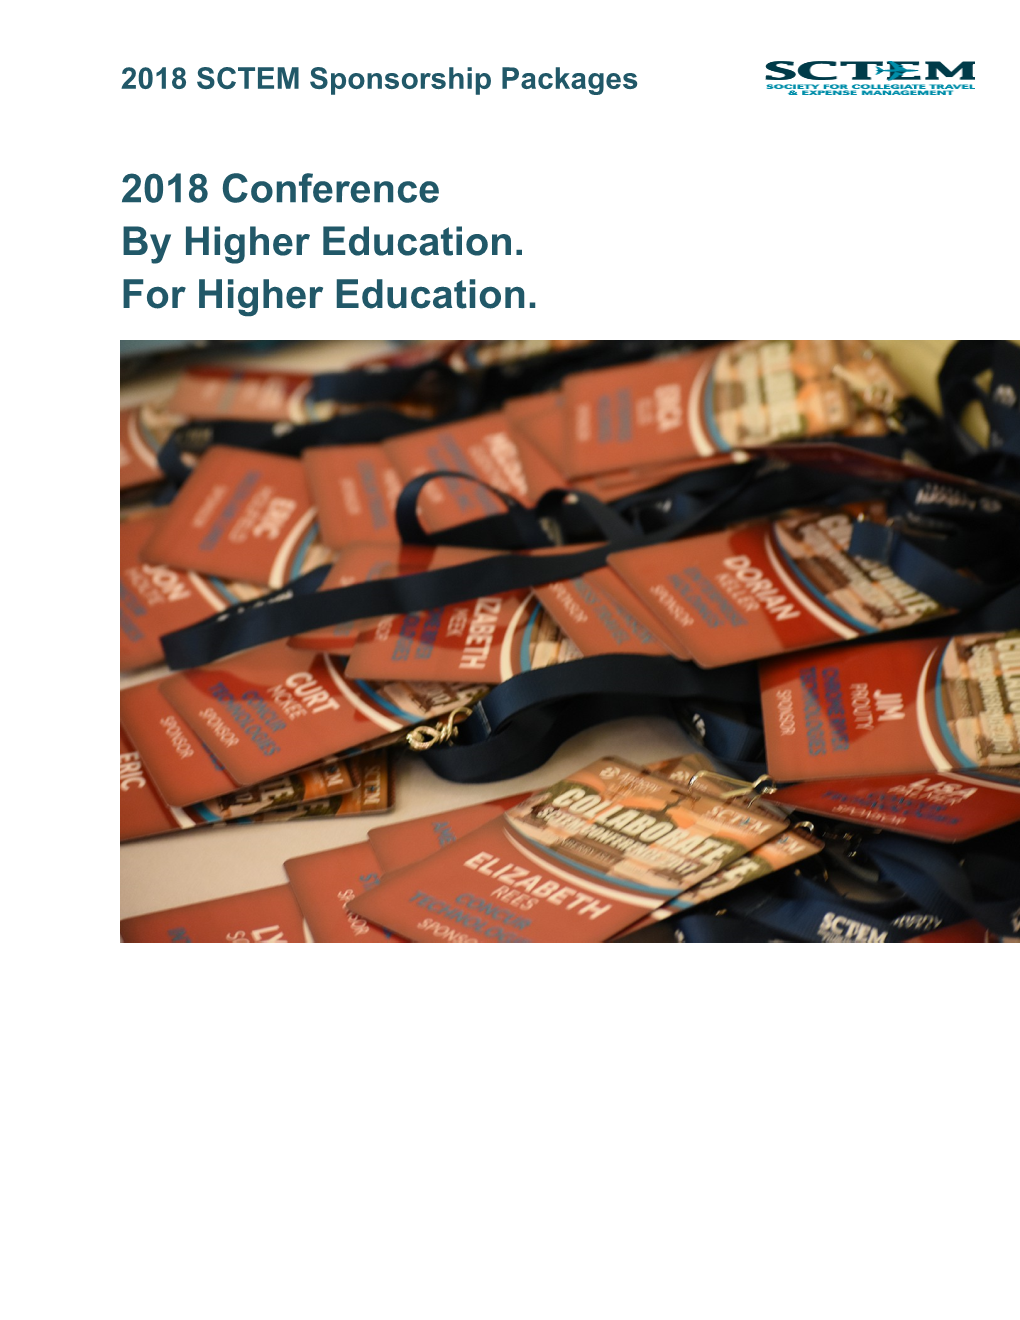 2018 Conference by Higher Education. for Higher Education